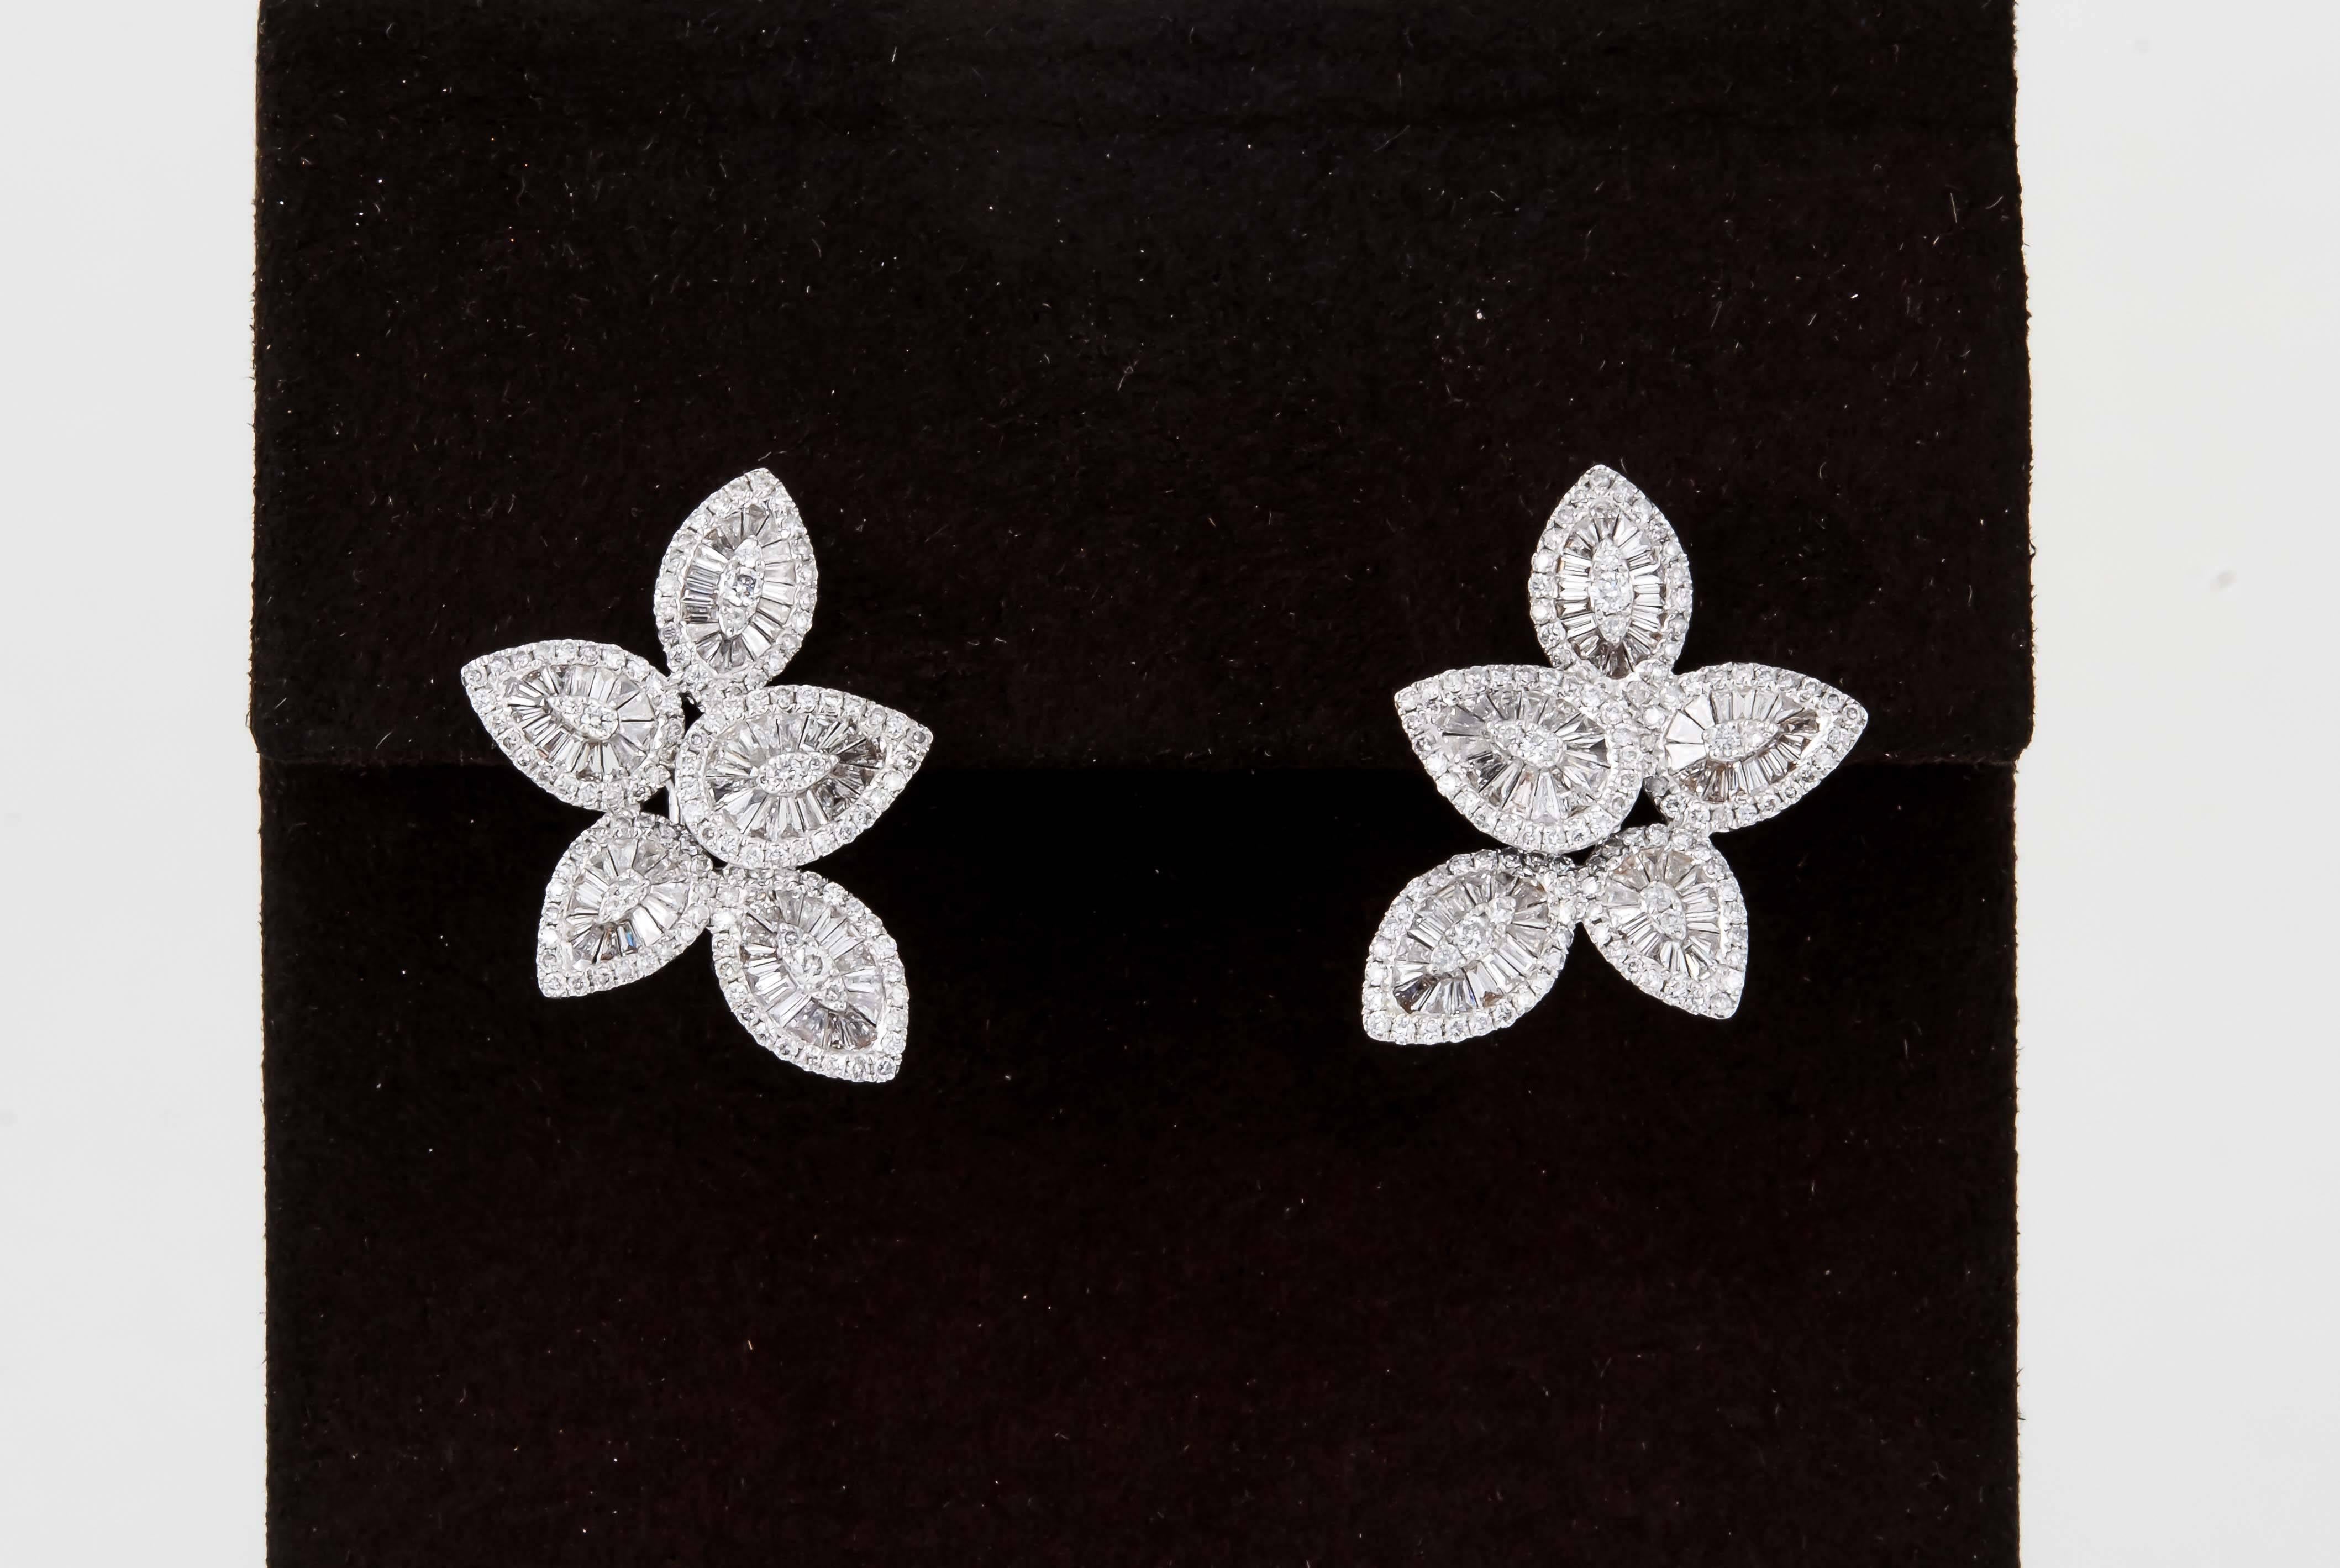 

A must have!

2.07 carats of F/G color VS clarity round and baguette cut diamonds set in an iconic pear shape and marquise design. 

A fabulous earrings that can be worn from day into evening. 

Approximately 0.72 inches at its widest